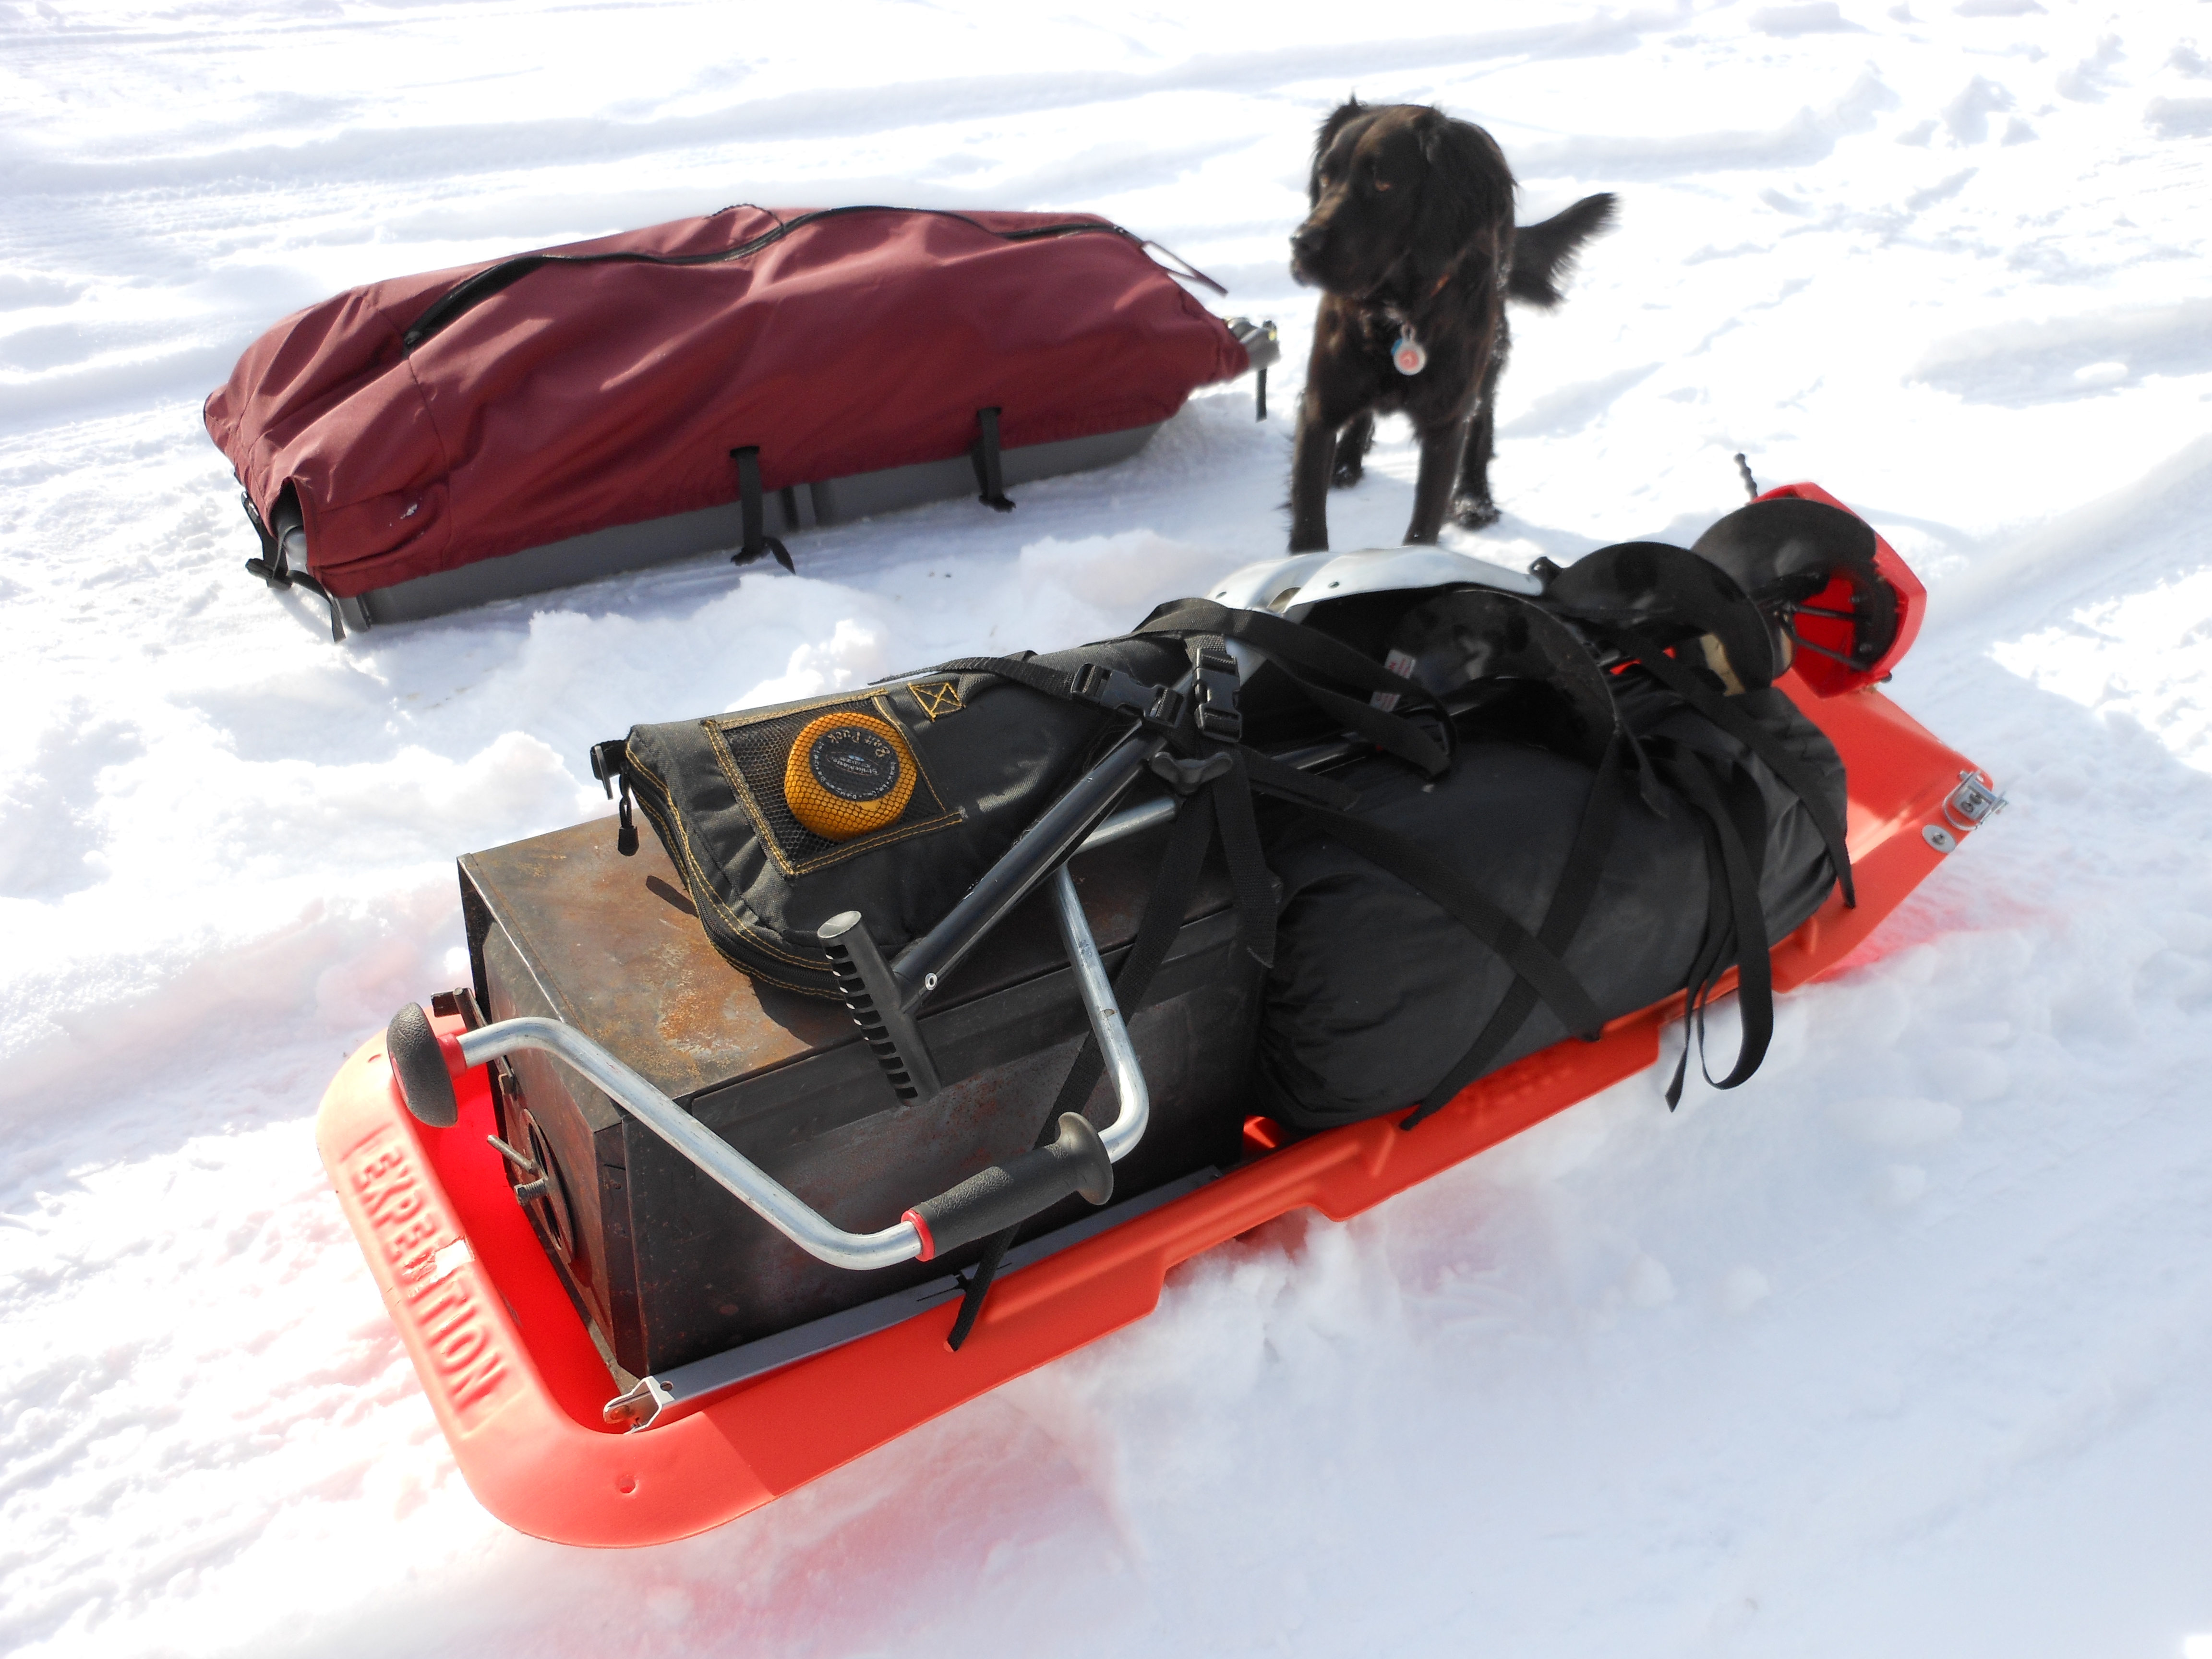 Using a Pulk as a Backcountry Ice Fishing Sled –